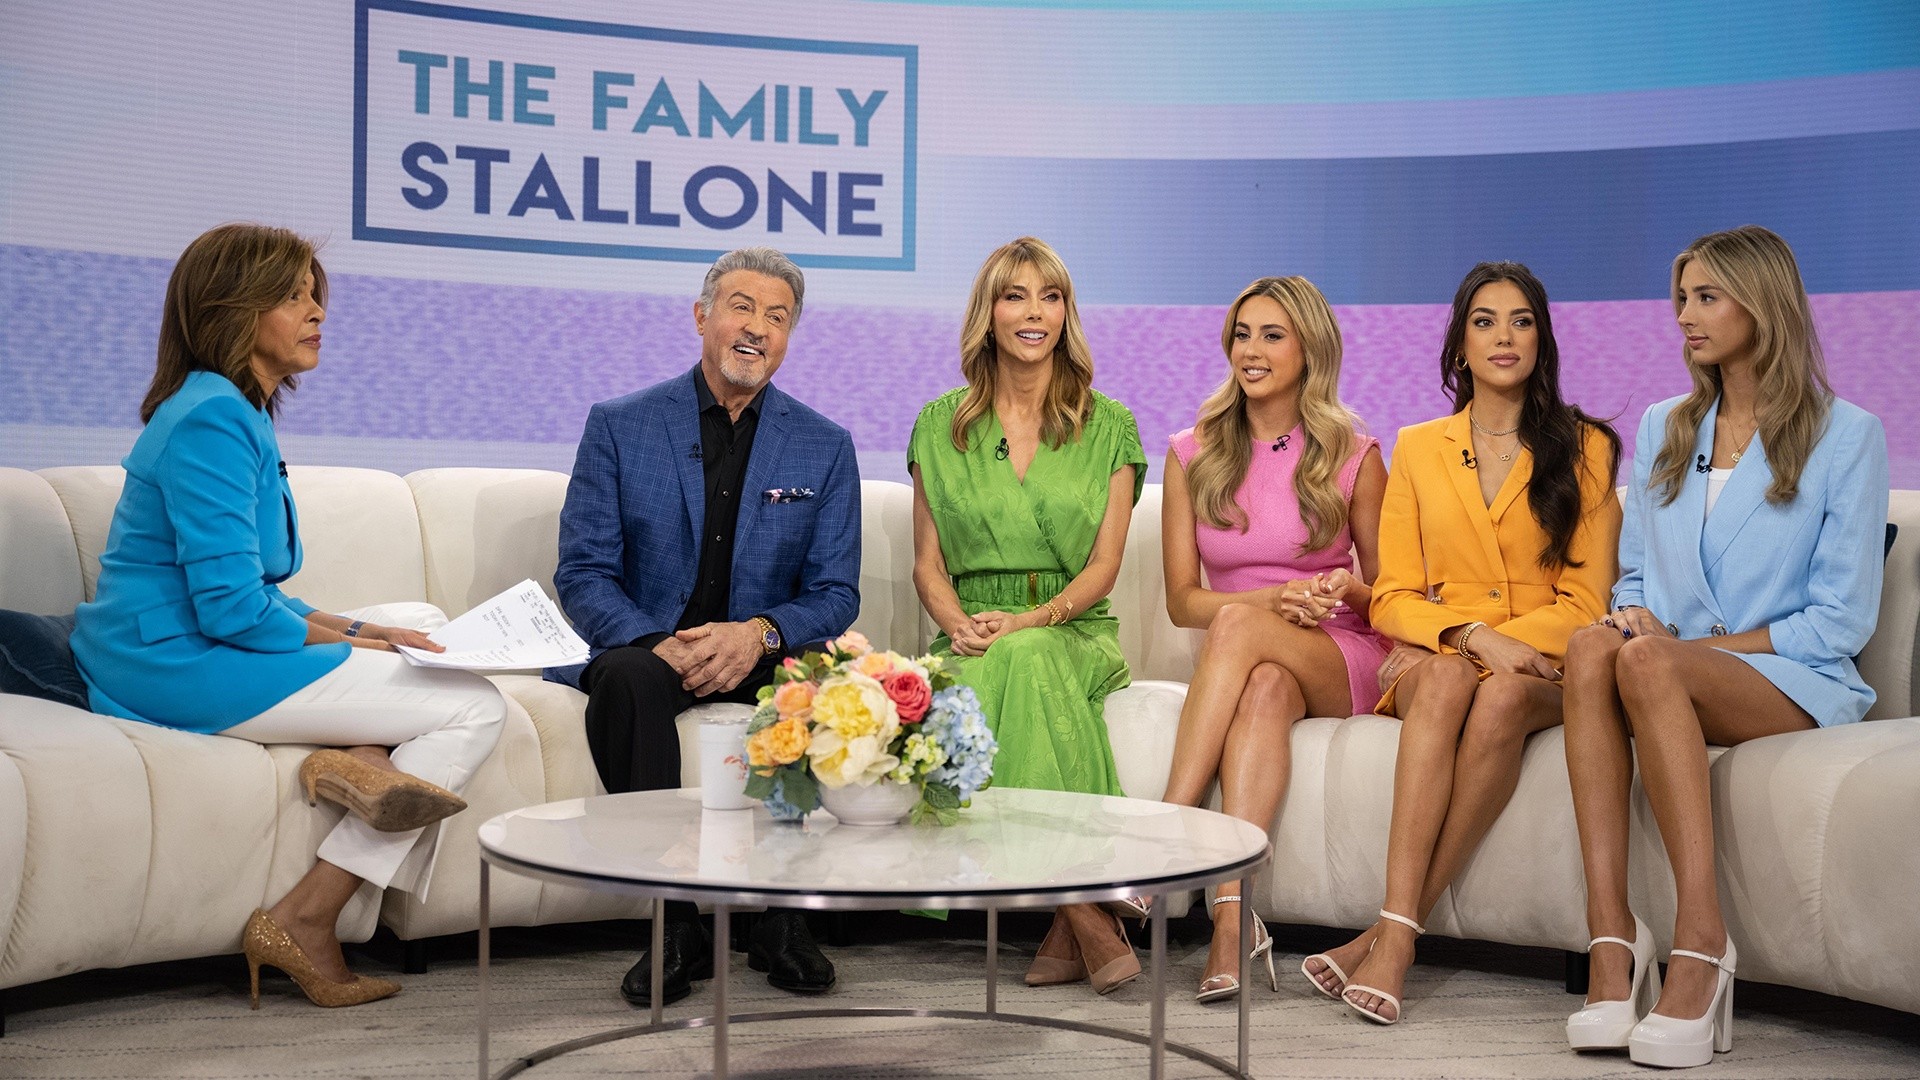 Sylvester Stallone and family on opening their home to cameras